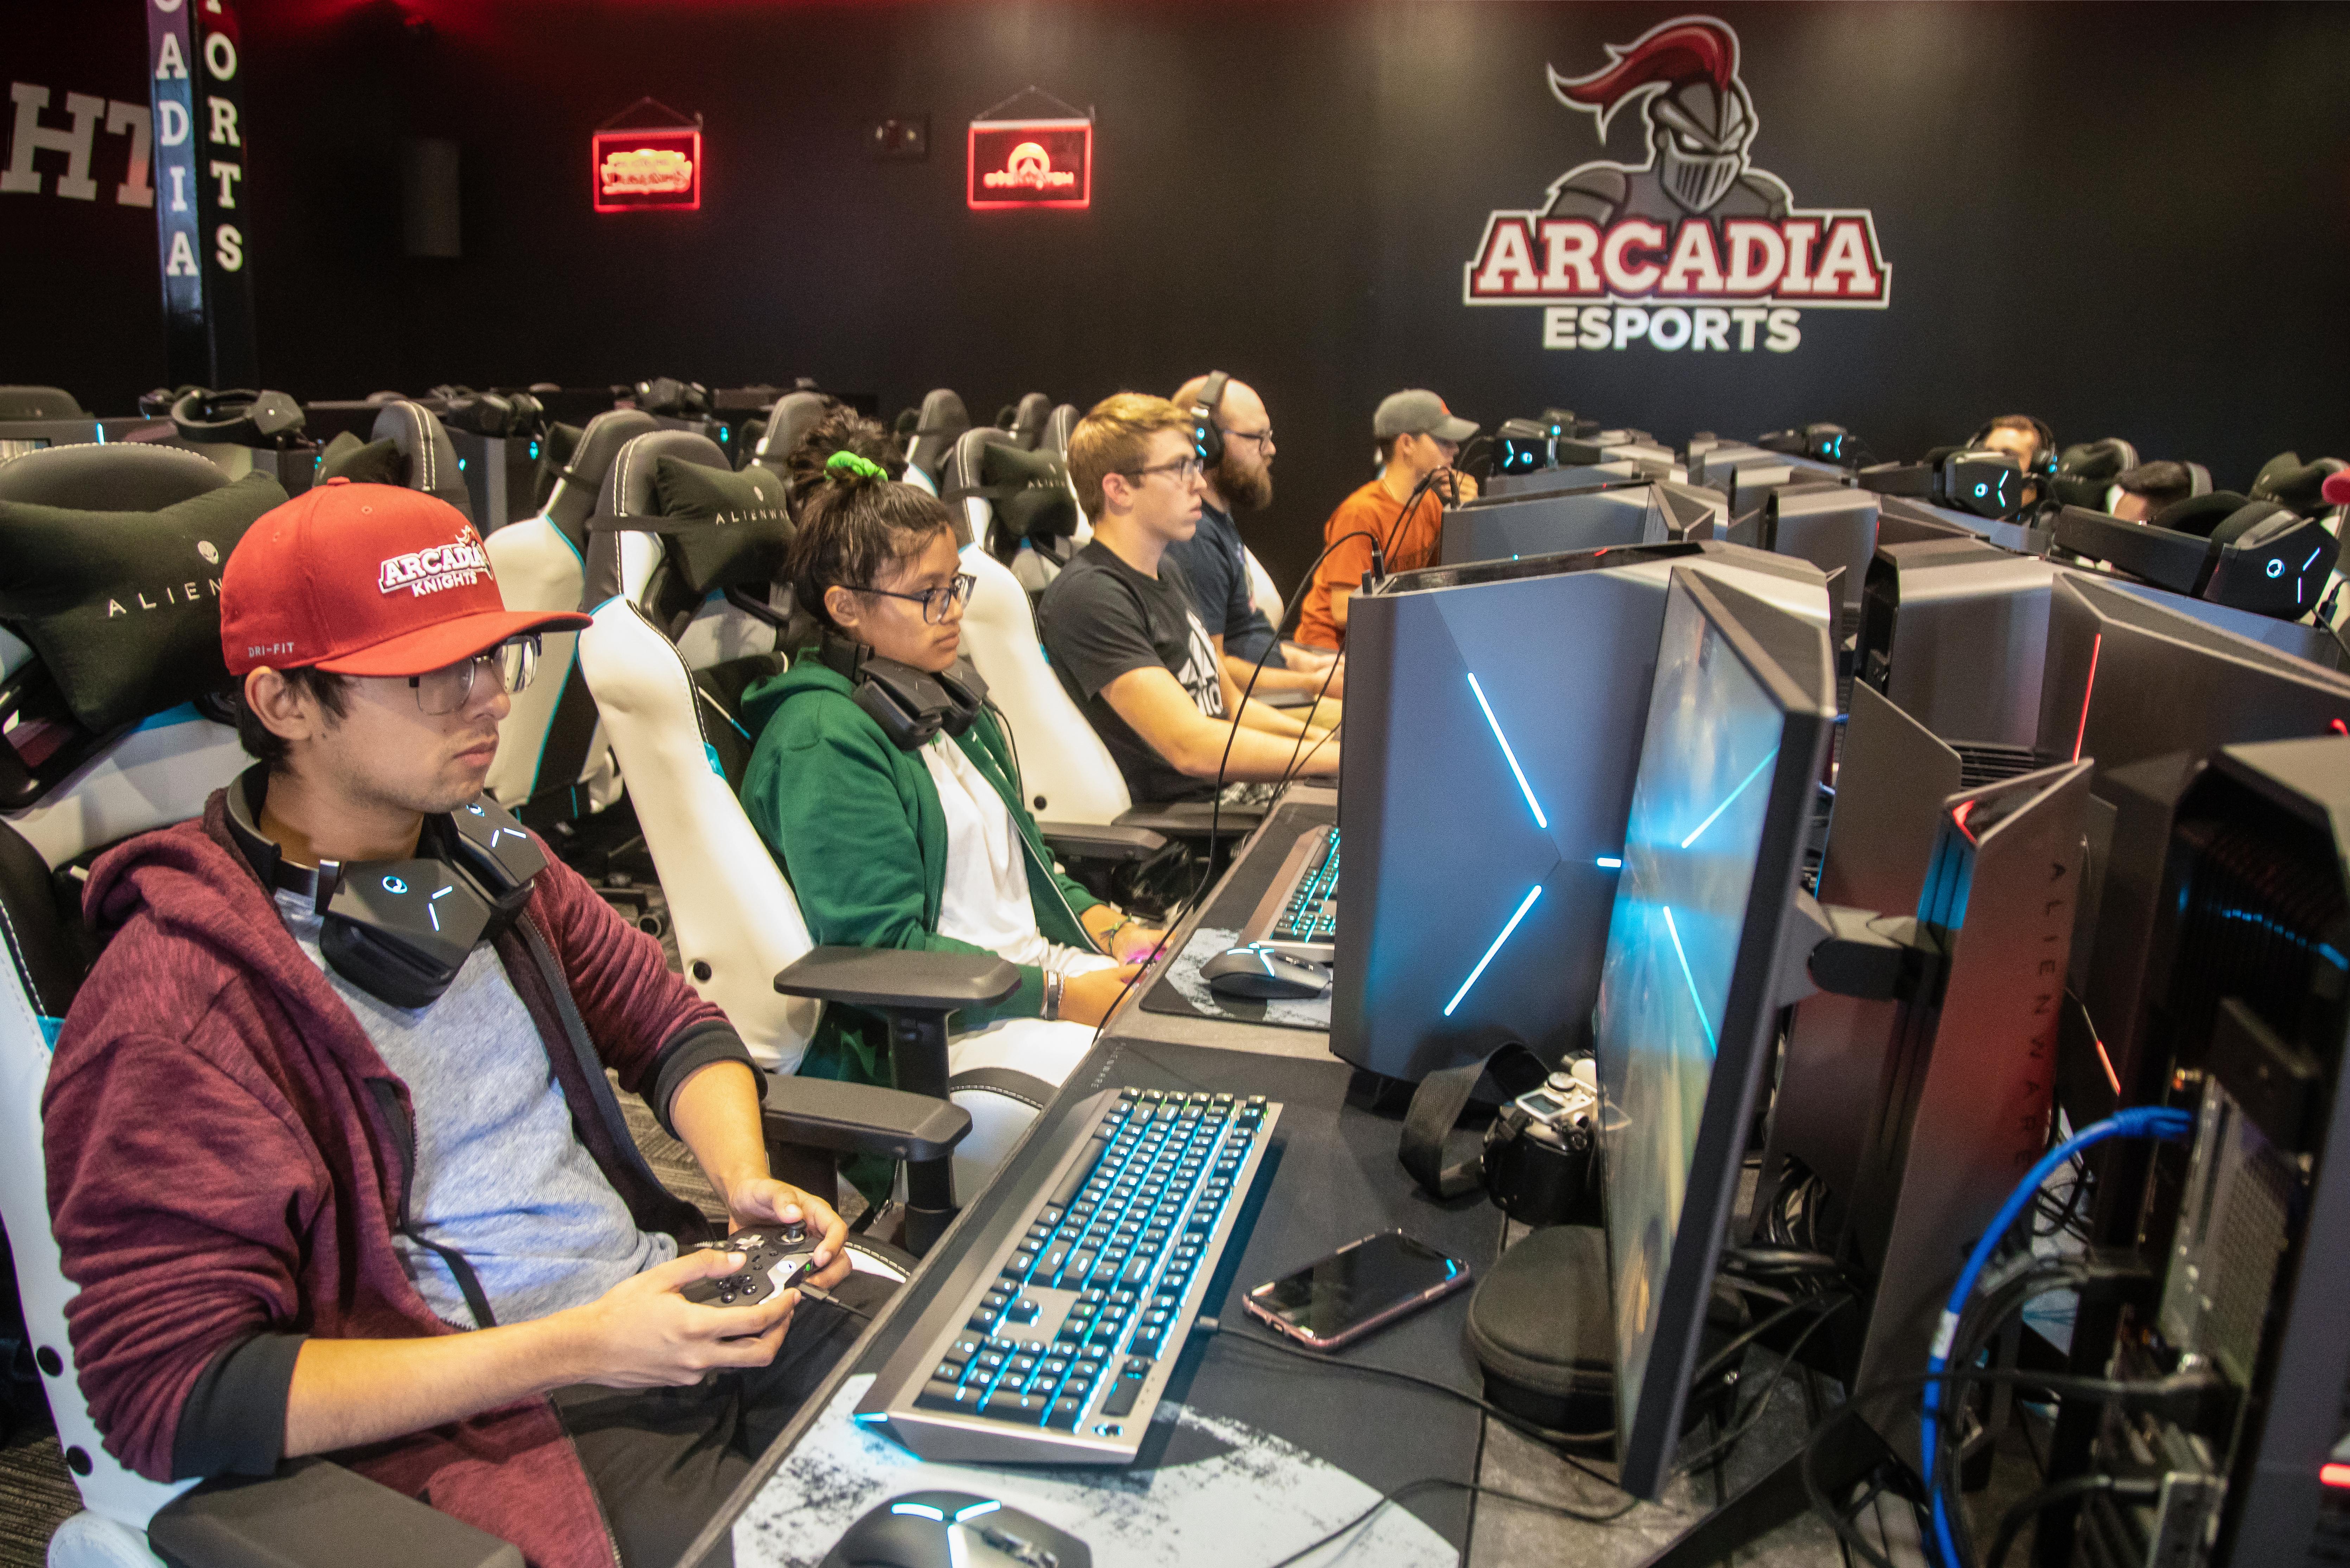 Arcadia University launches a co-educational esports program as a varsity sport in the fall 2019.